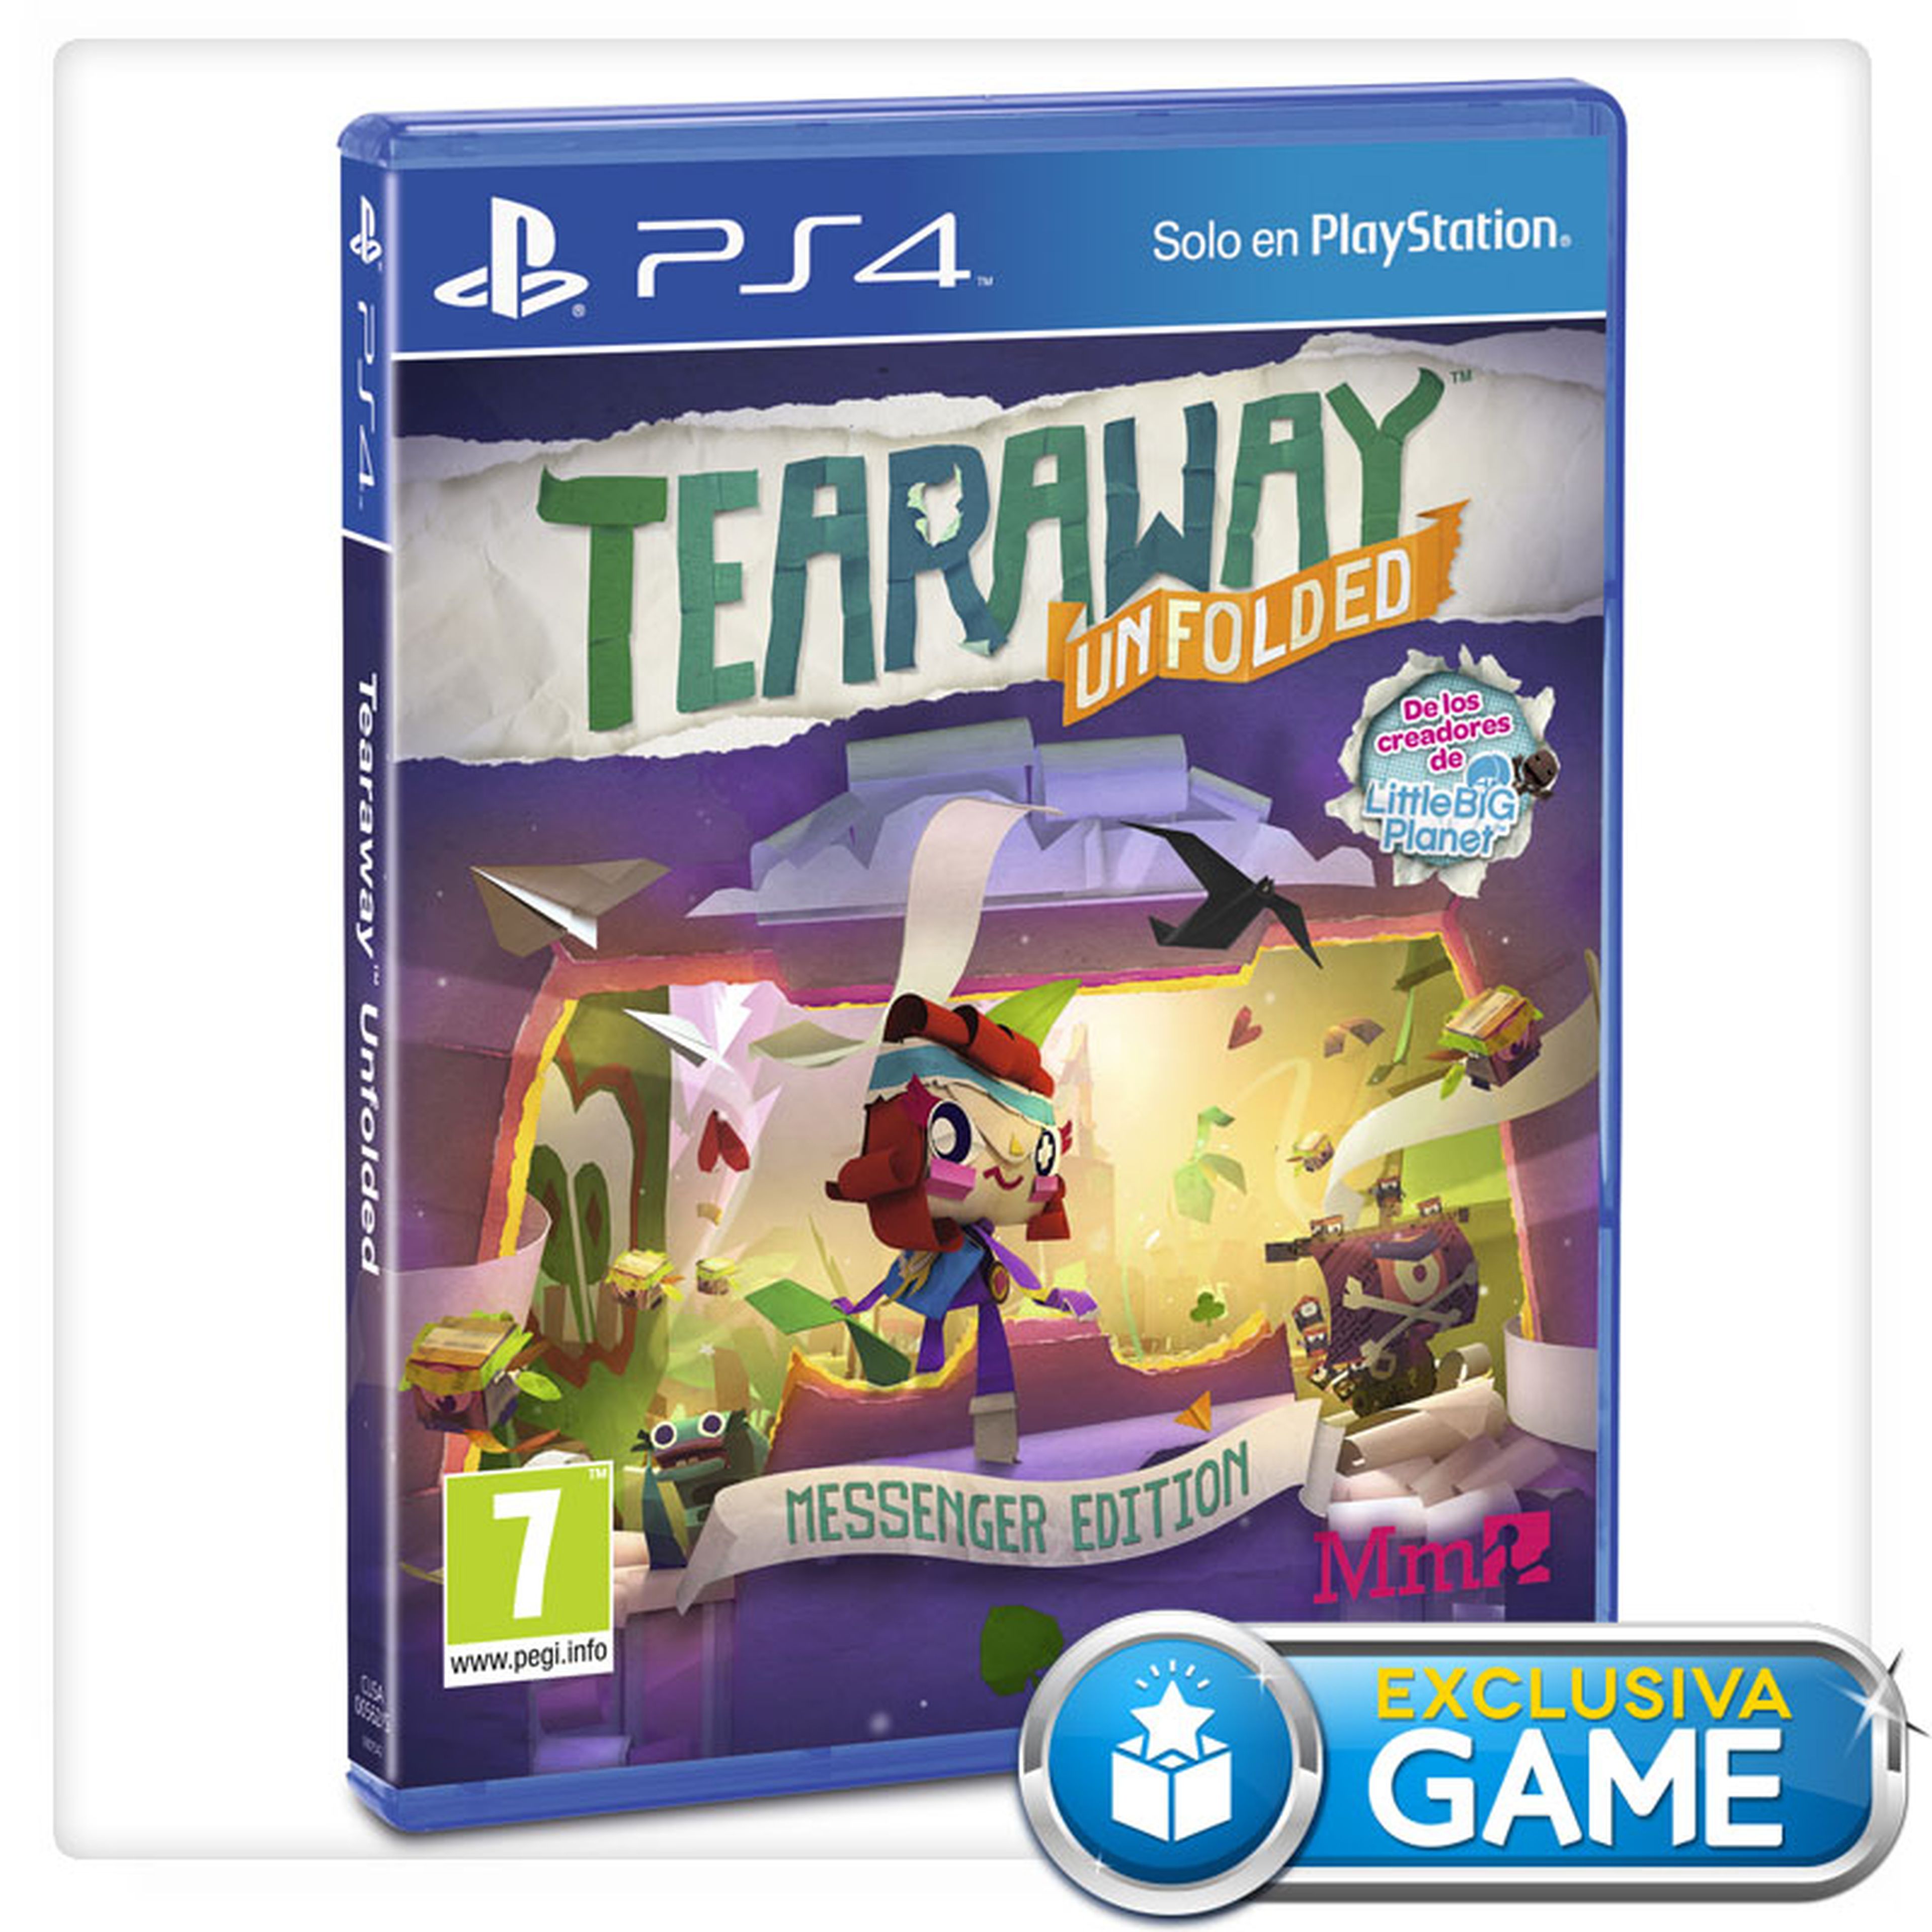 Tearaway Unfolded Messenger Edition, disponible solo en GAME